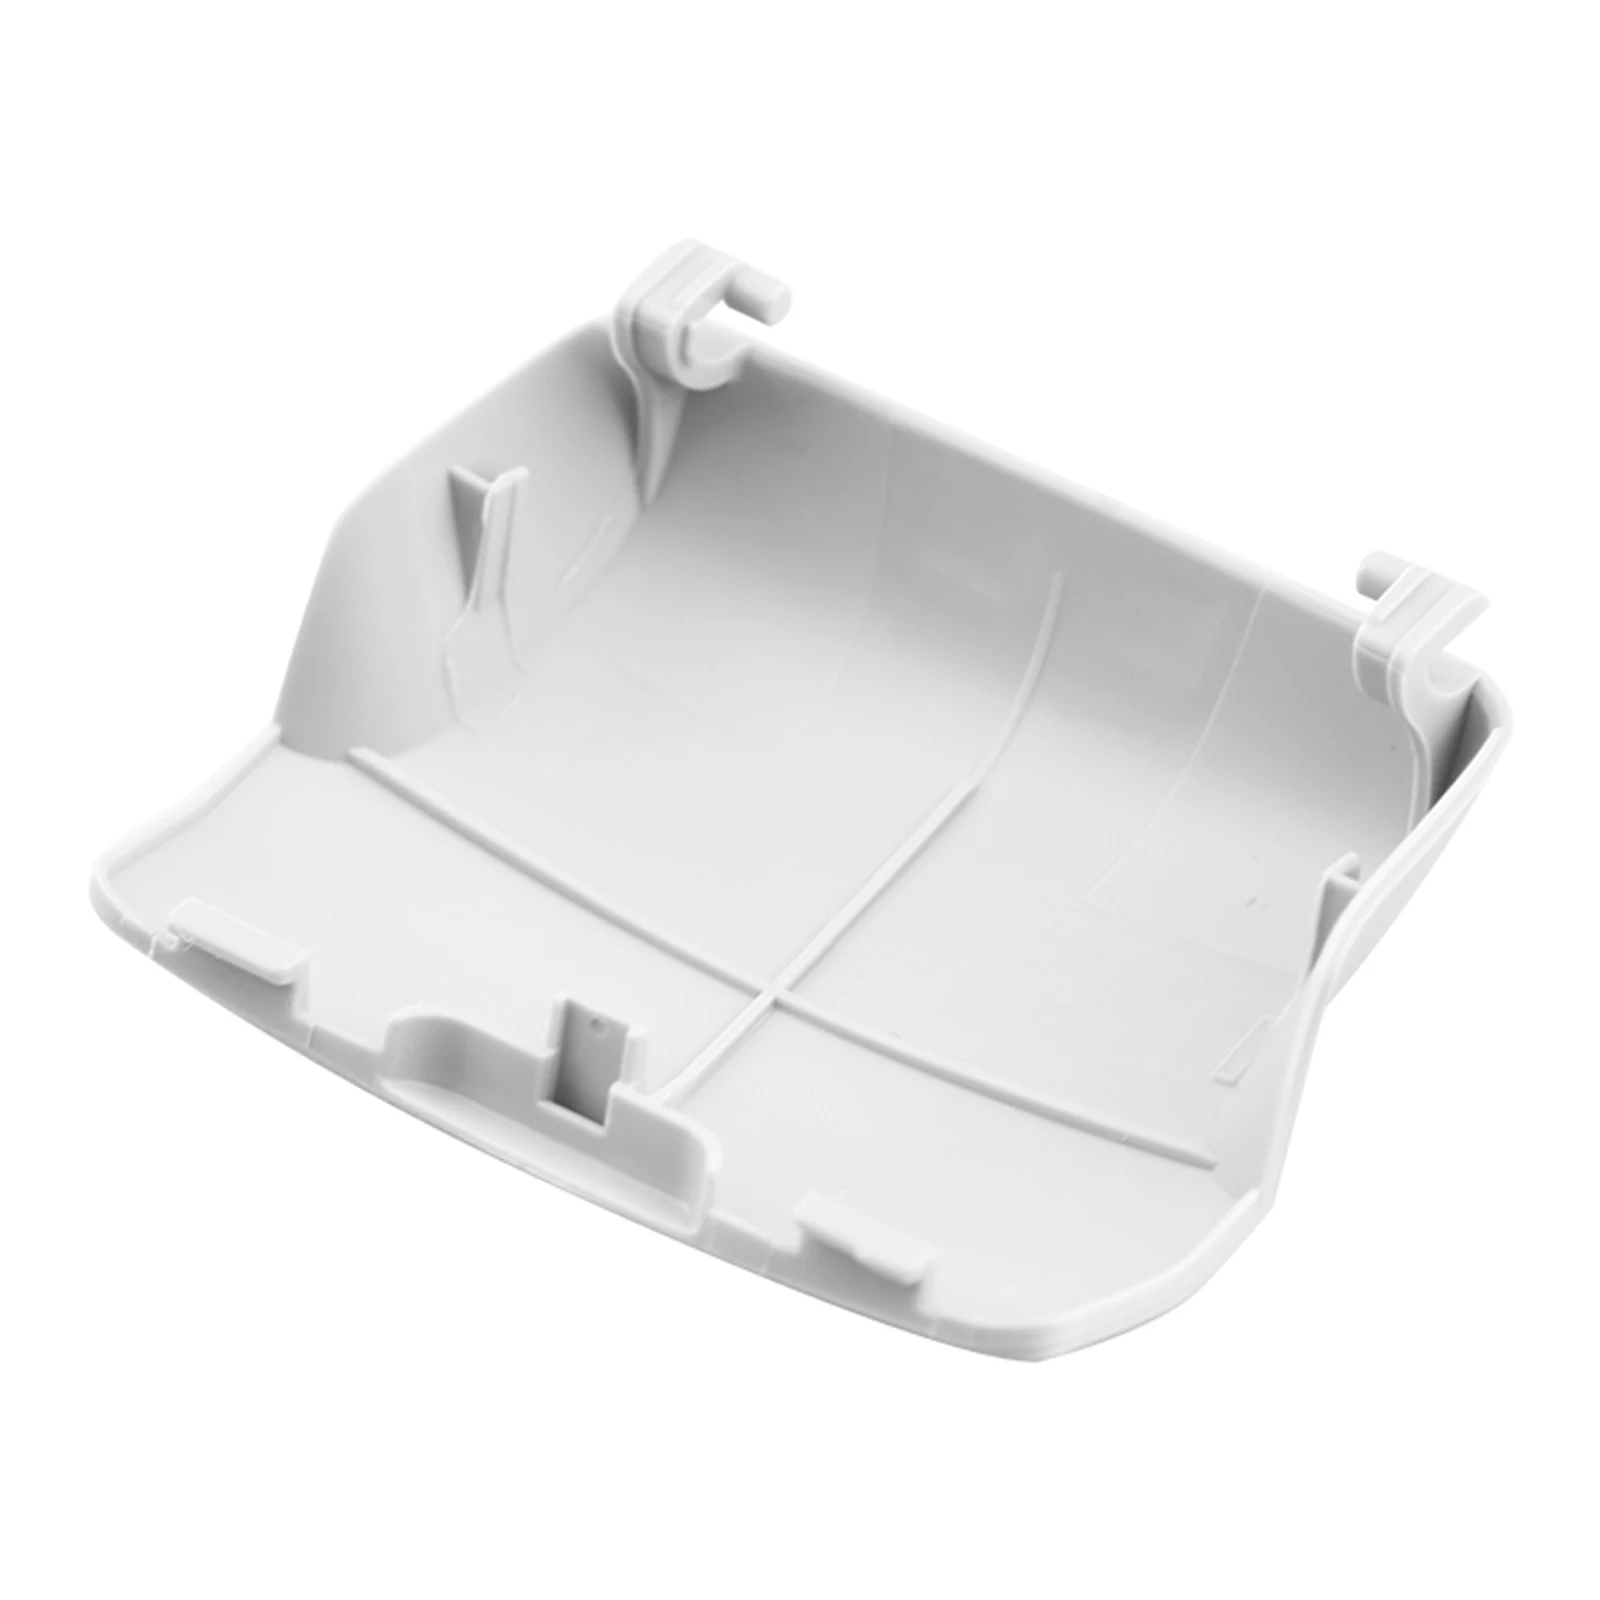 Battery Cover Compartment Repair Parts Protective Holder for Mavic Mini/Mini 2 Parts Replacements